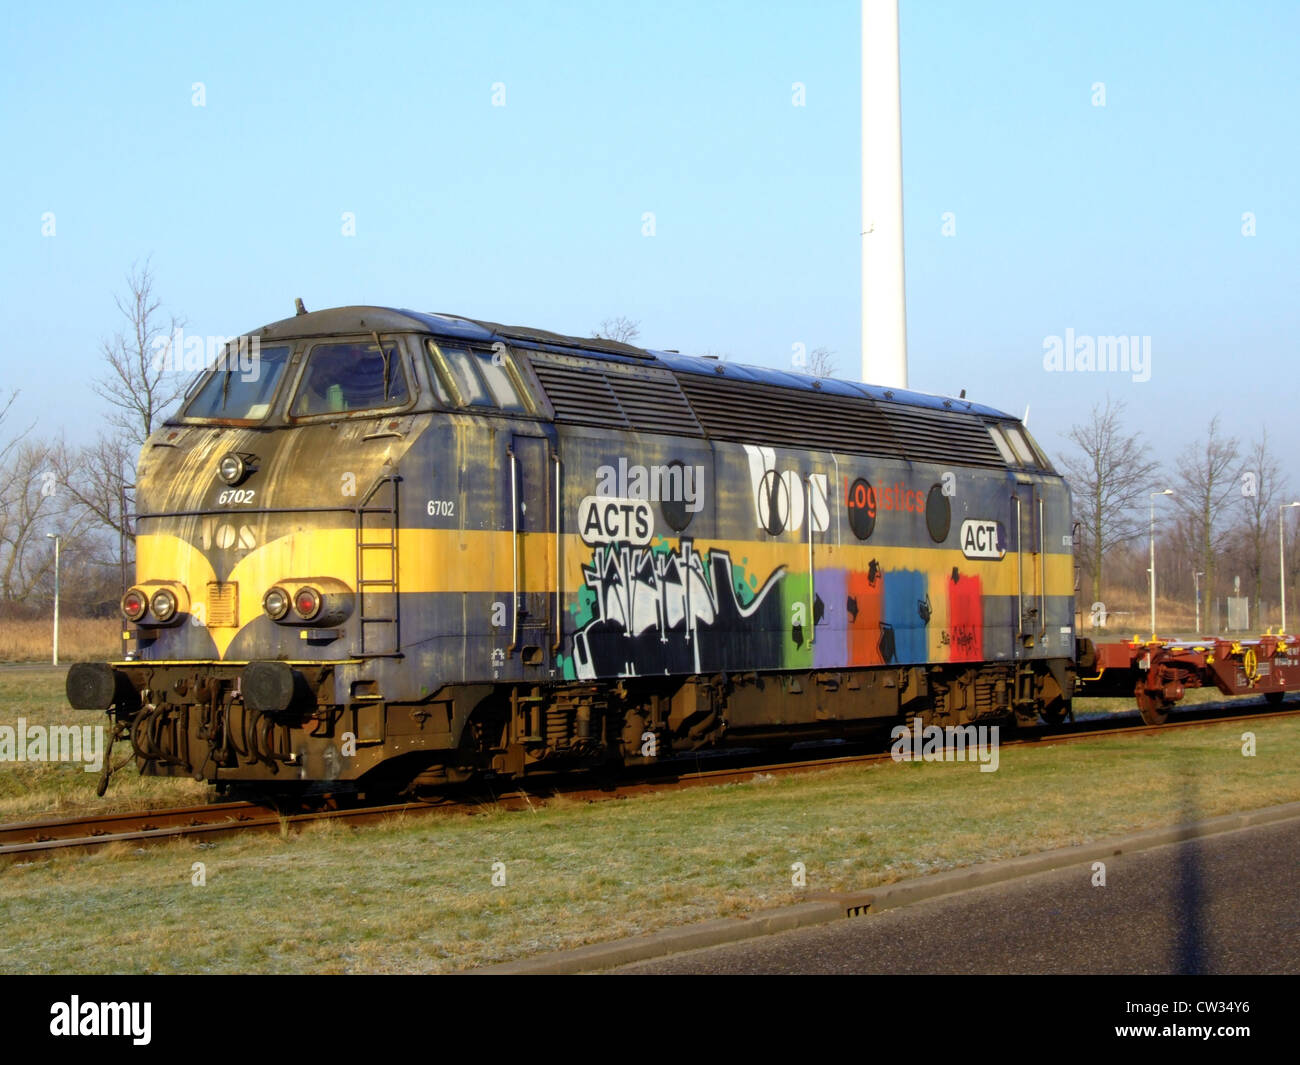 ACTS 6702 (Afzet Container Transport Systeem) at Amsterdam. Stock Photo